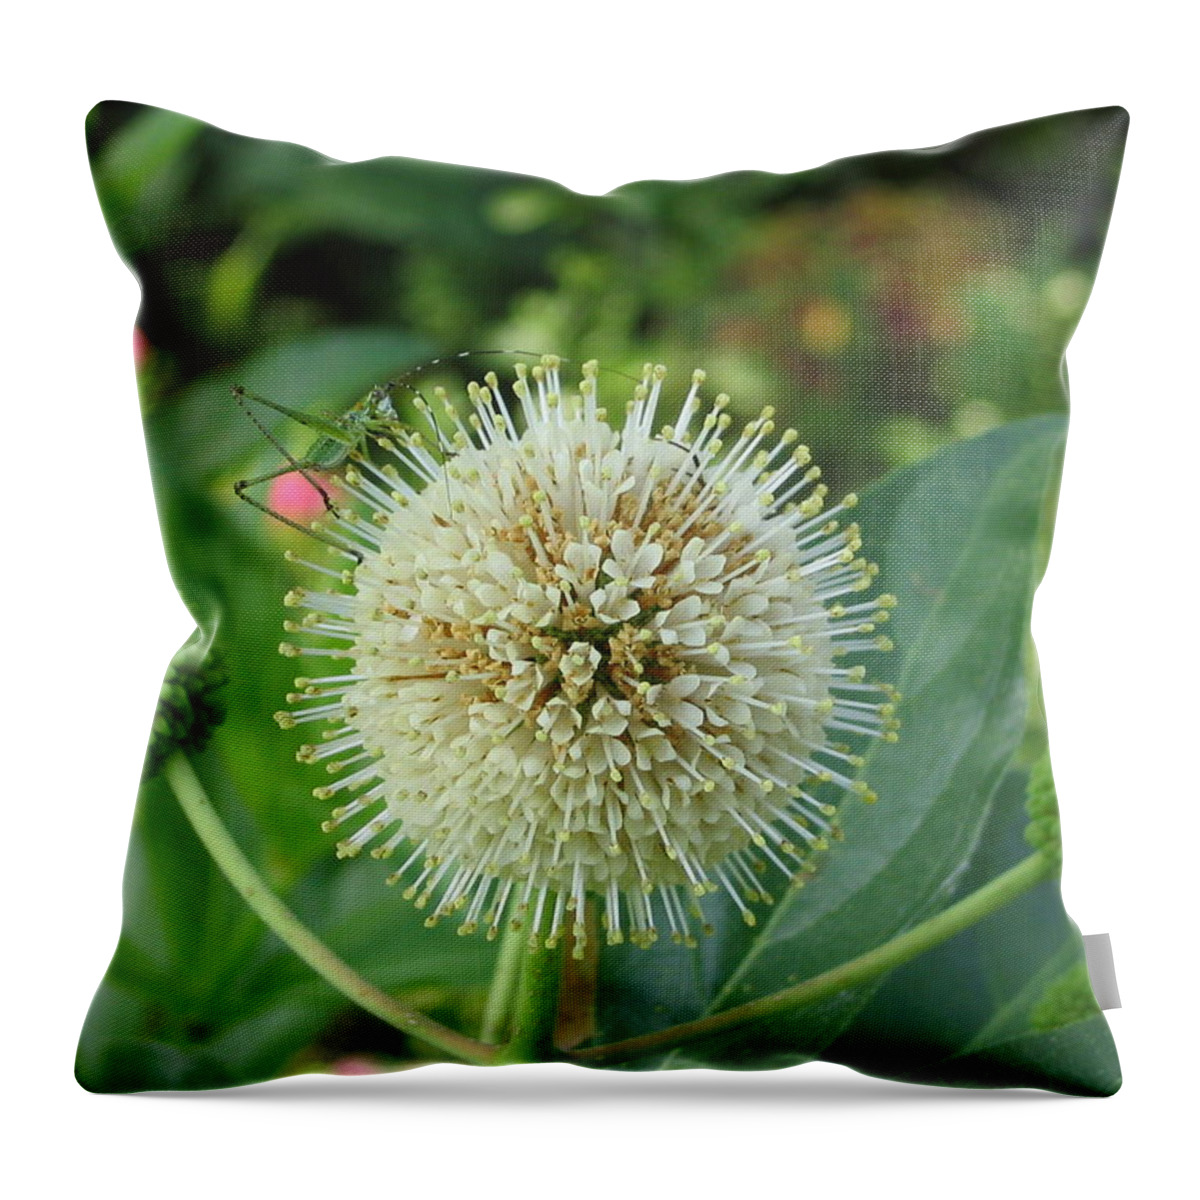 Grasshopper Throw Pillow featuring the photograph Snakeroot Rider by Mark Robbins